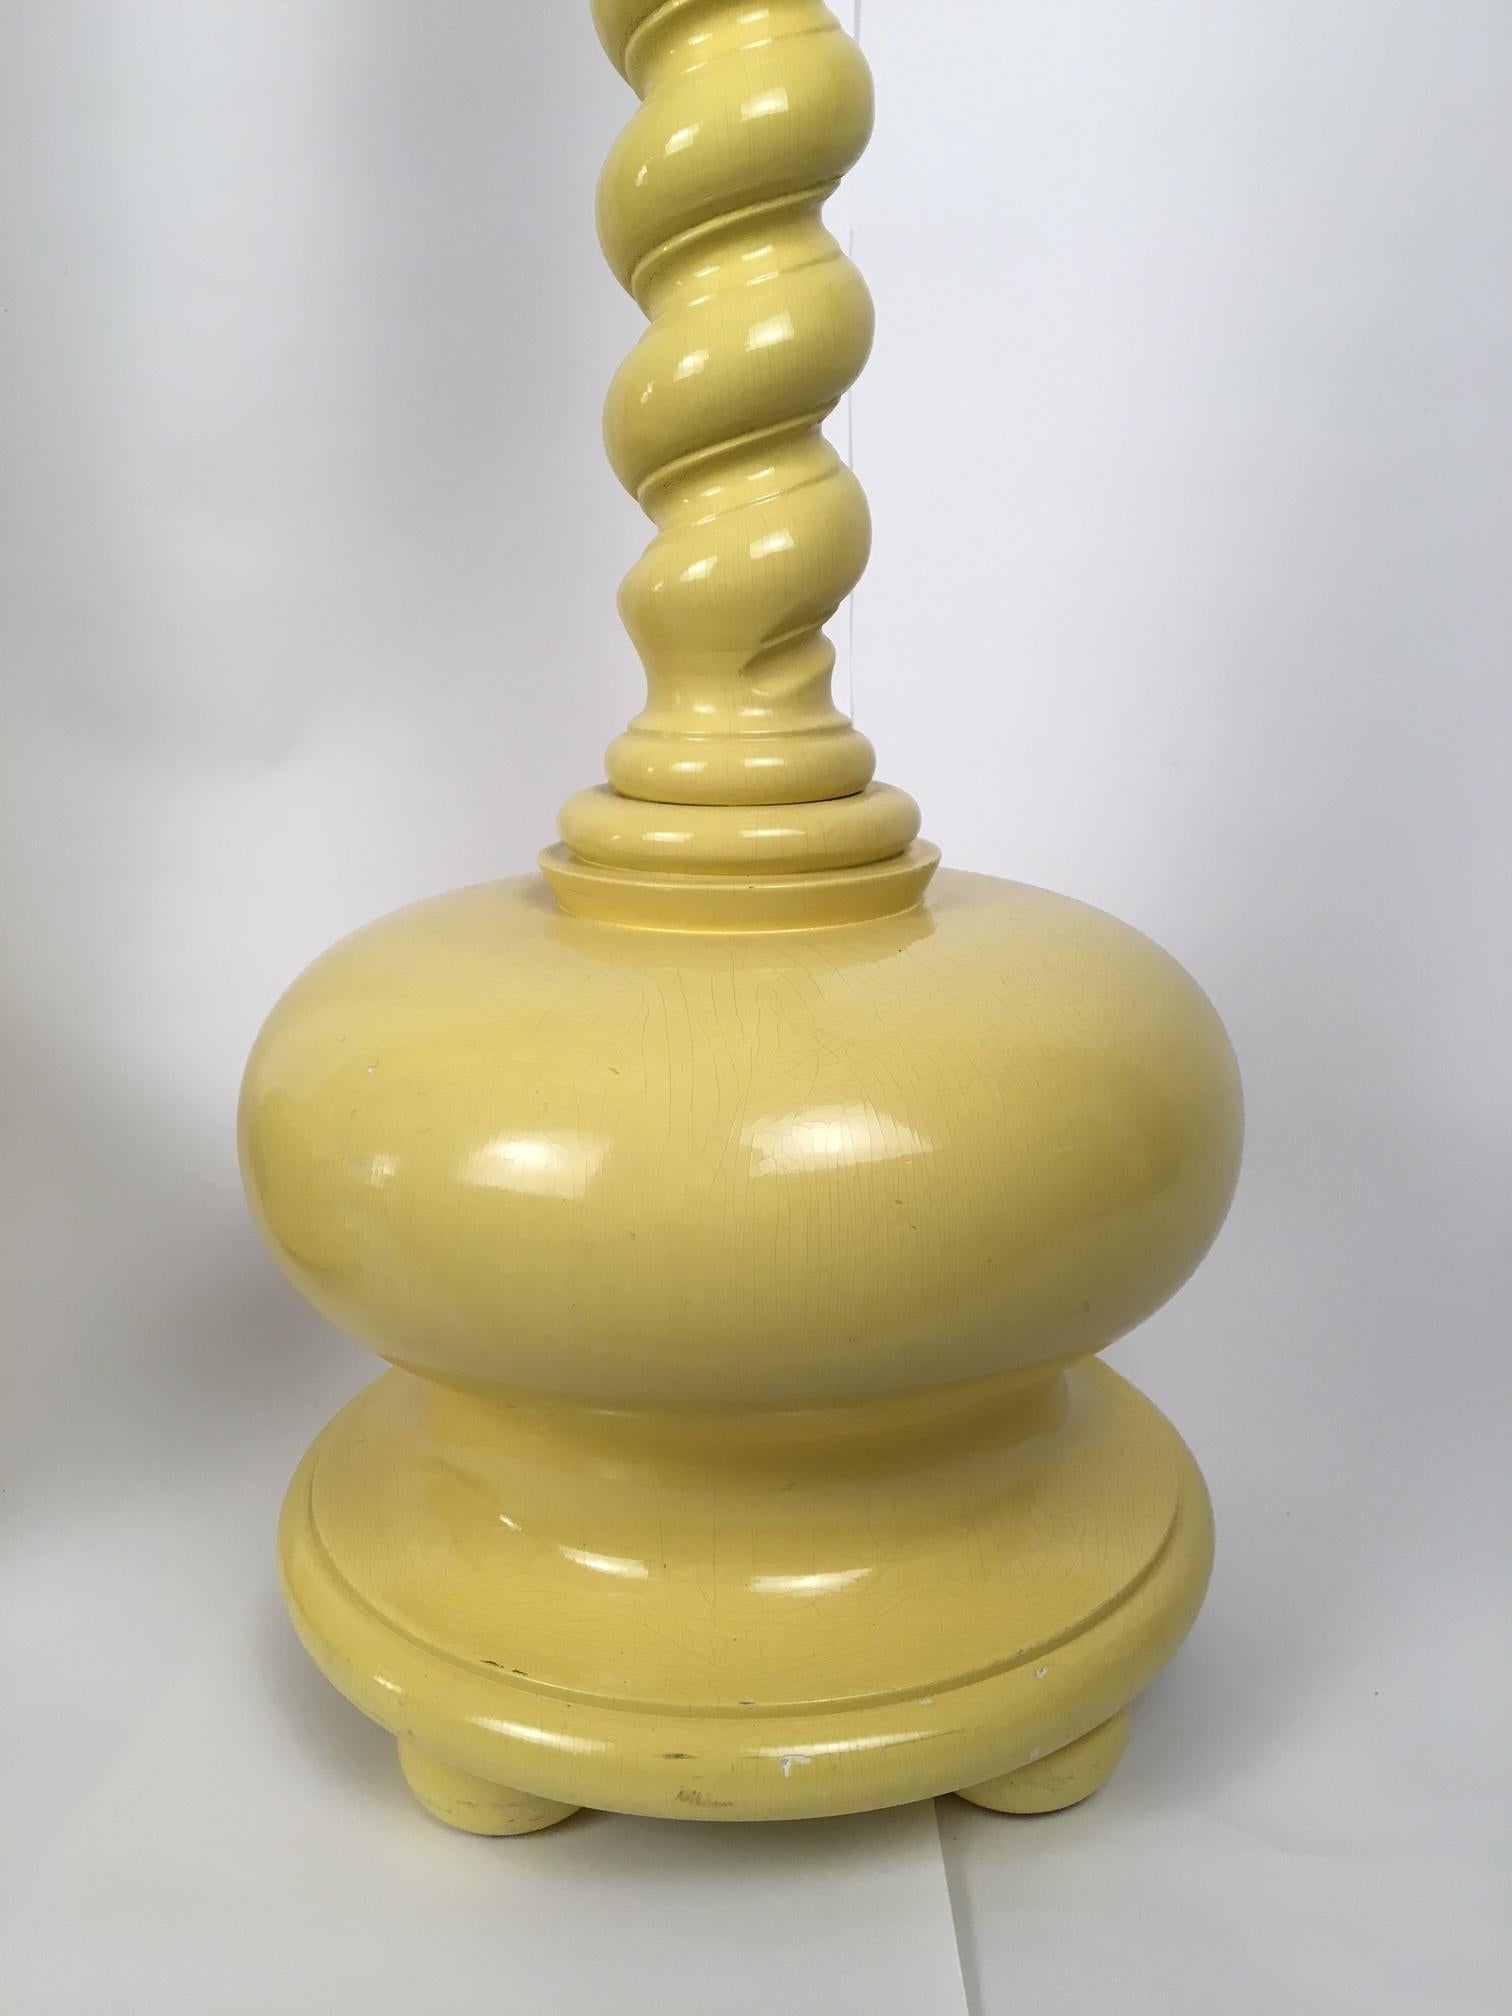 Pair of yellow spiral twist floor lamps with large round bases. Perfect for your Hollywood Regency decor. Each lamp adjusts from 62.5